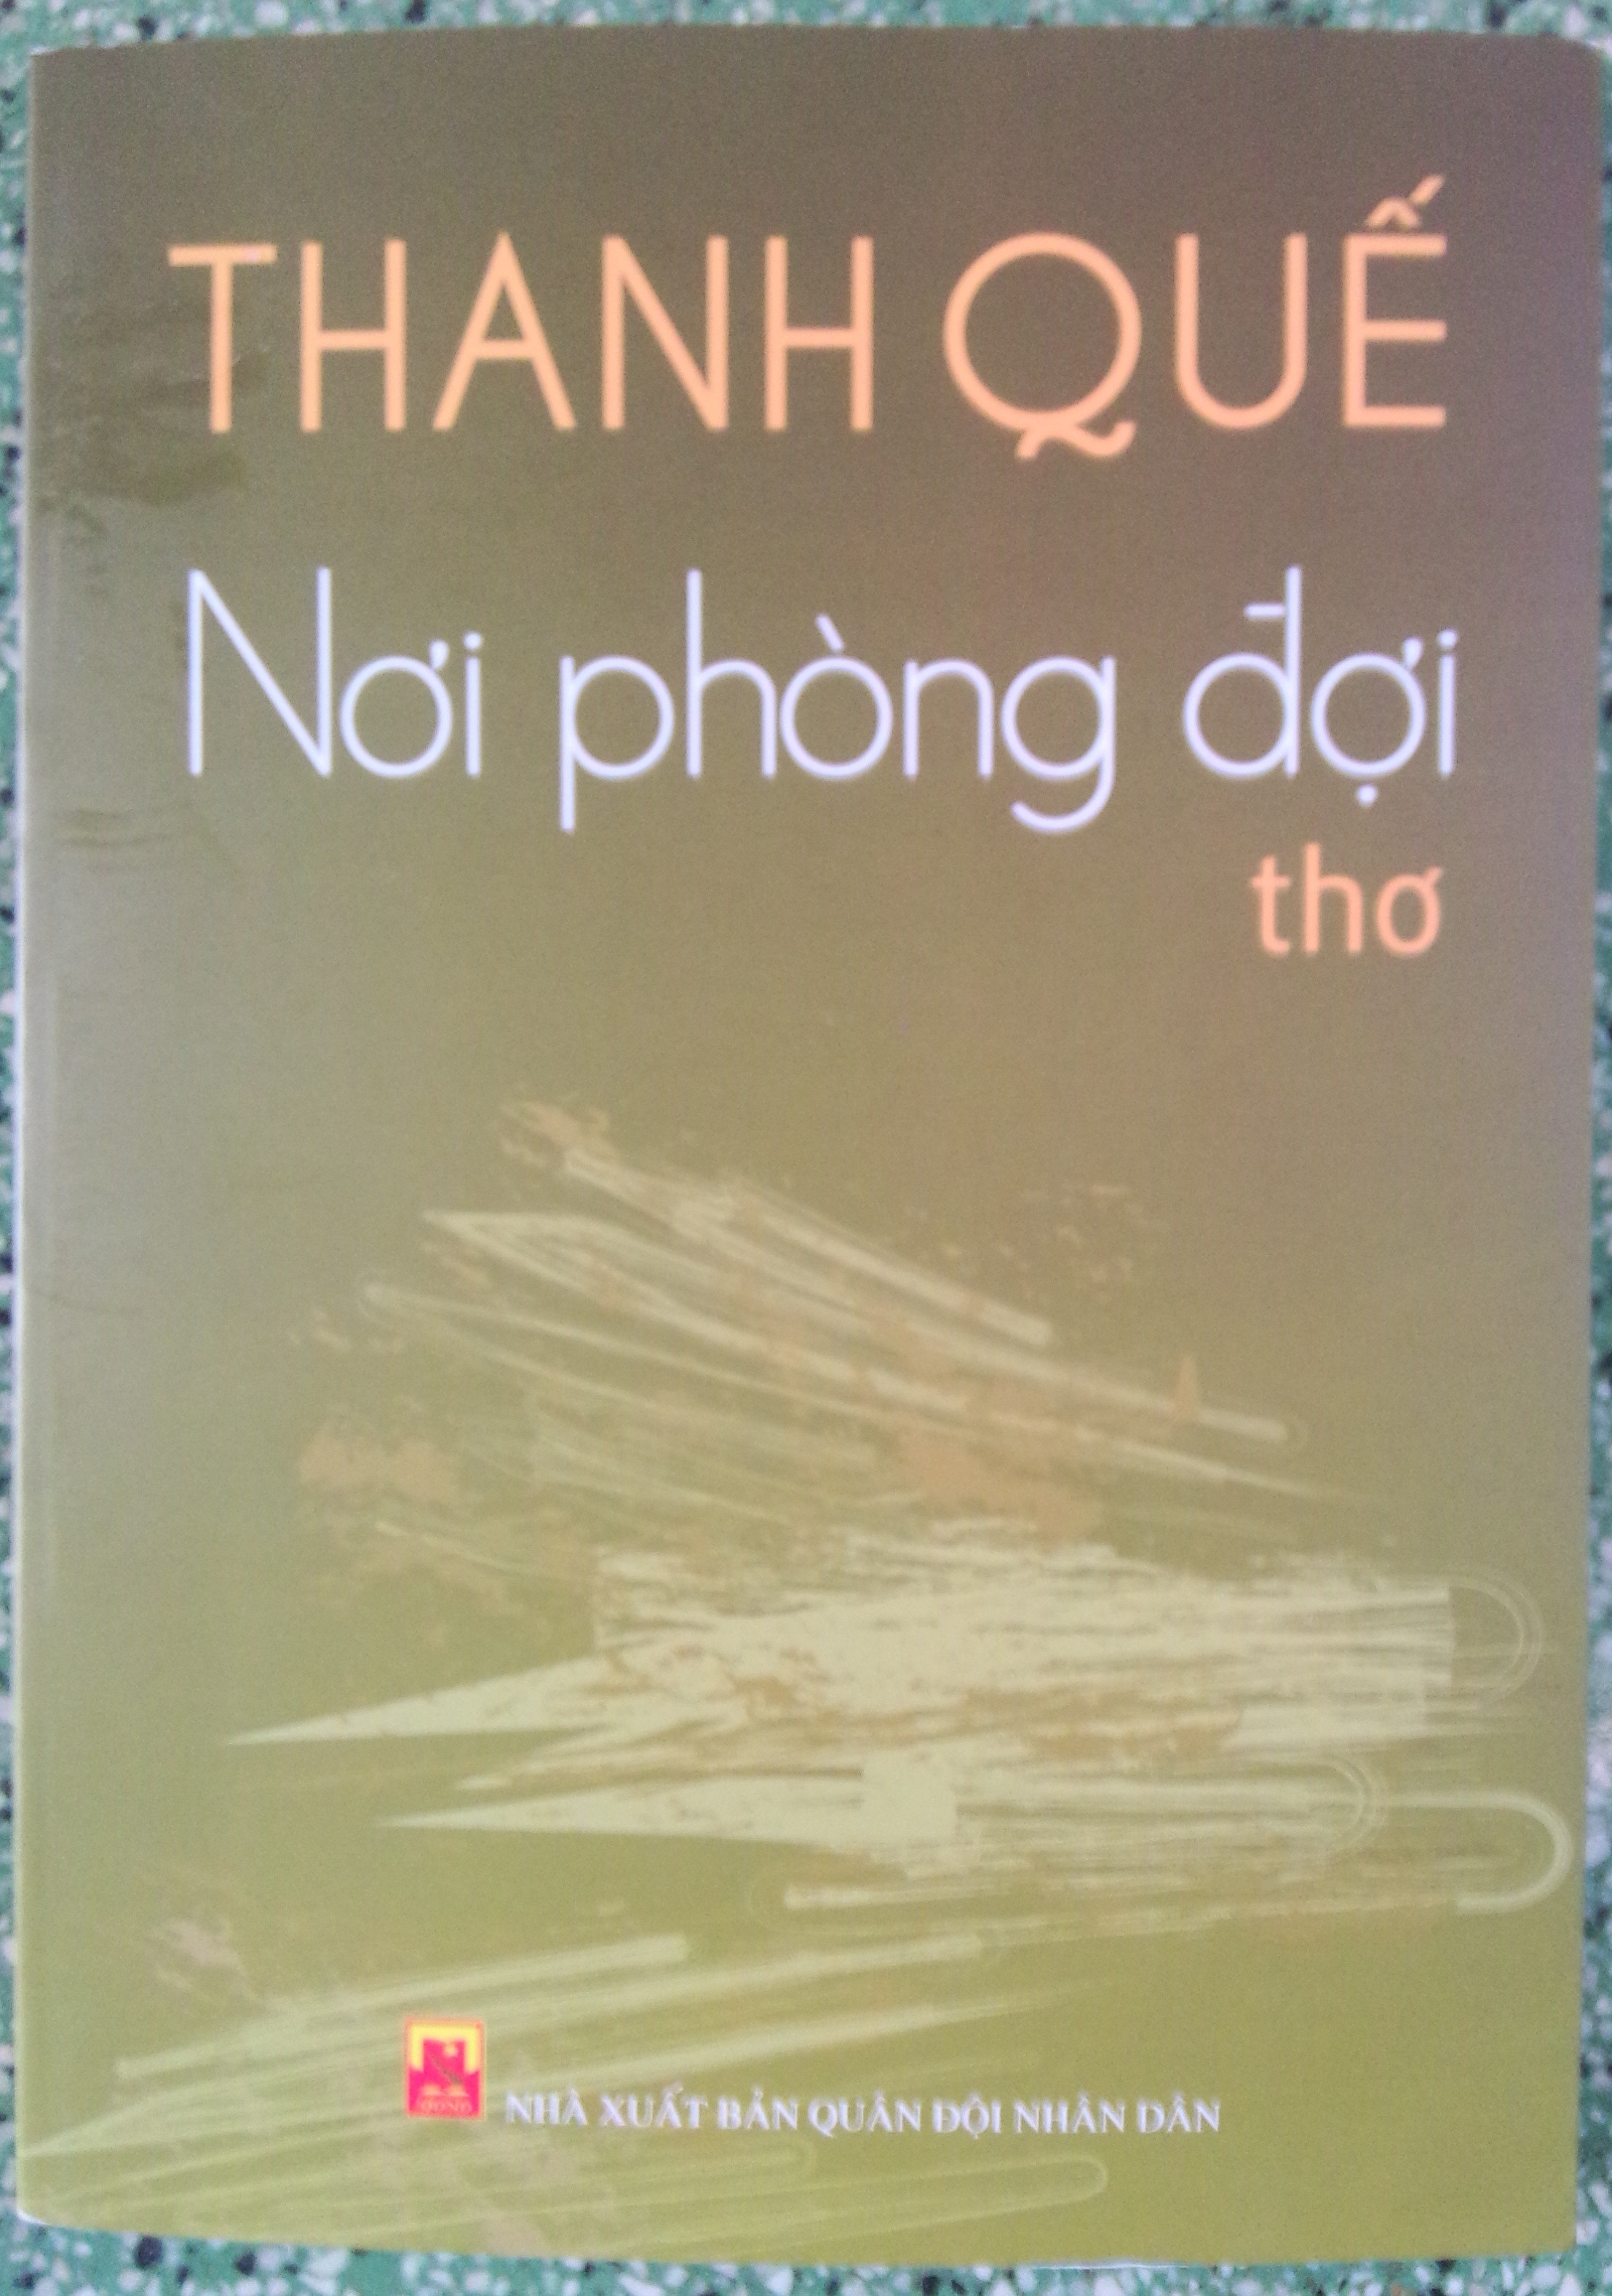 bia-tho-thanh-que-1713062694.jpg